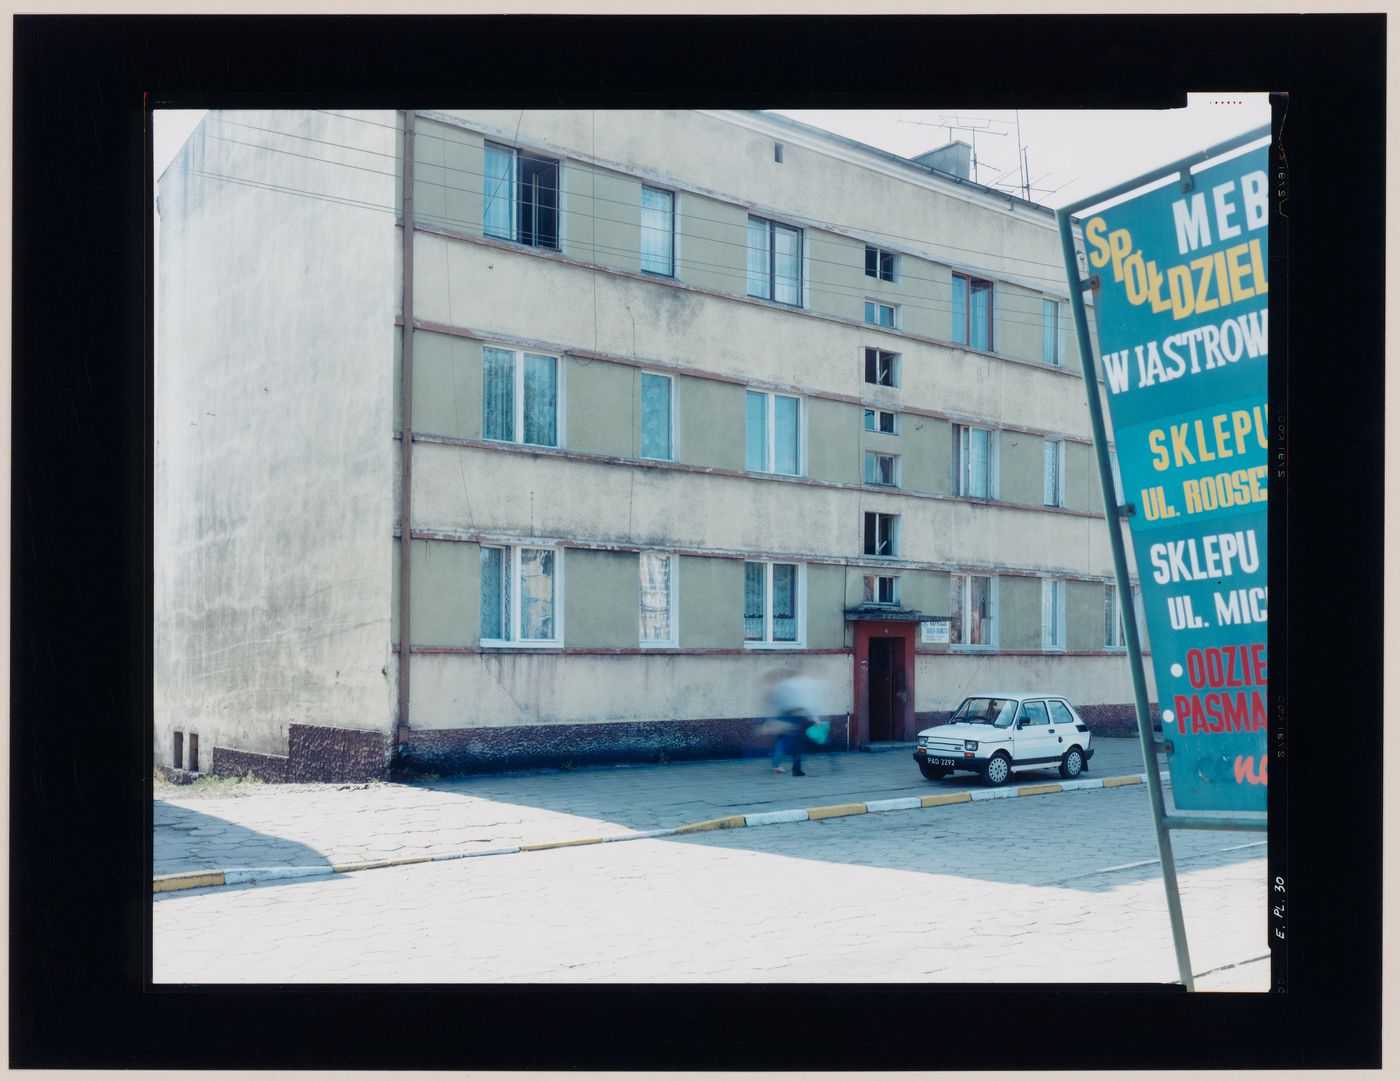 View of an apartment house, a street and a sign showing a parked automobile, Jastrowie, Poland (from the series "In between cities")